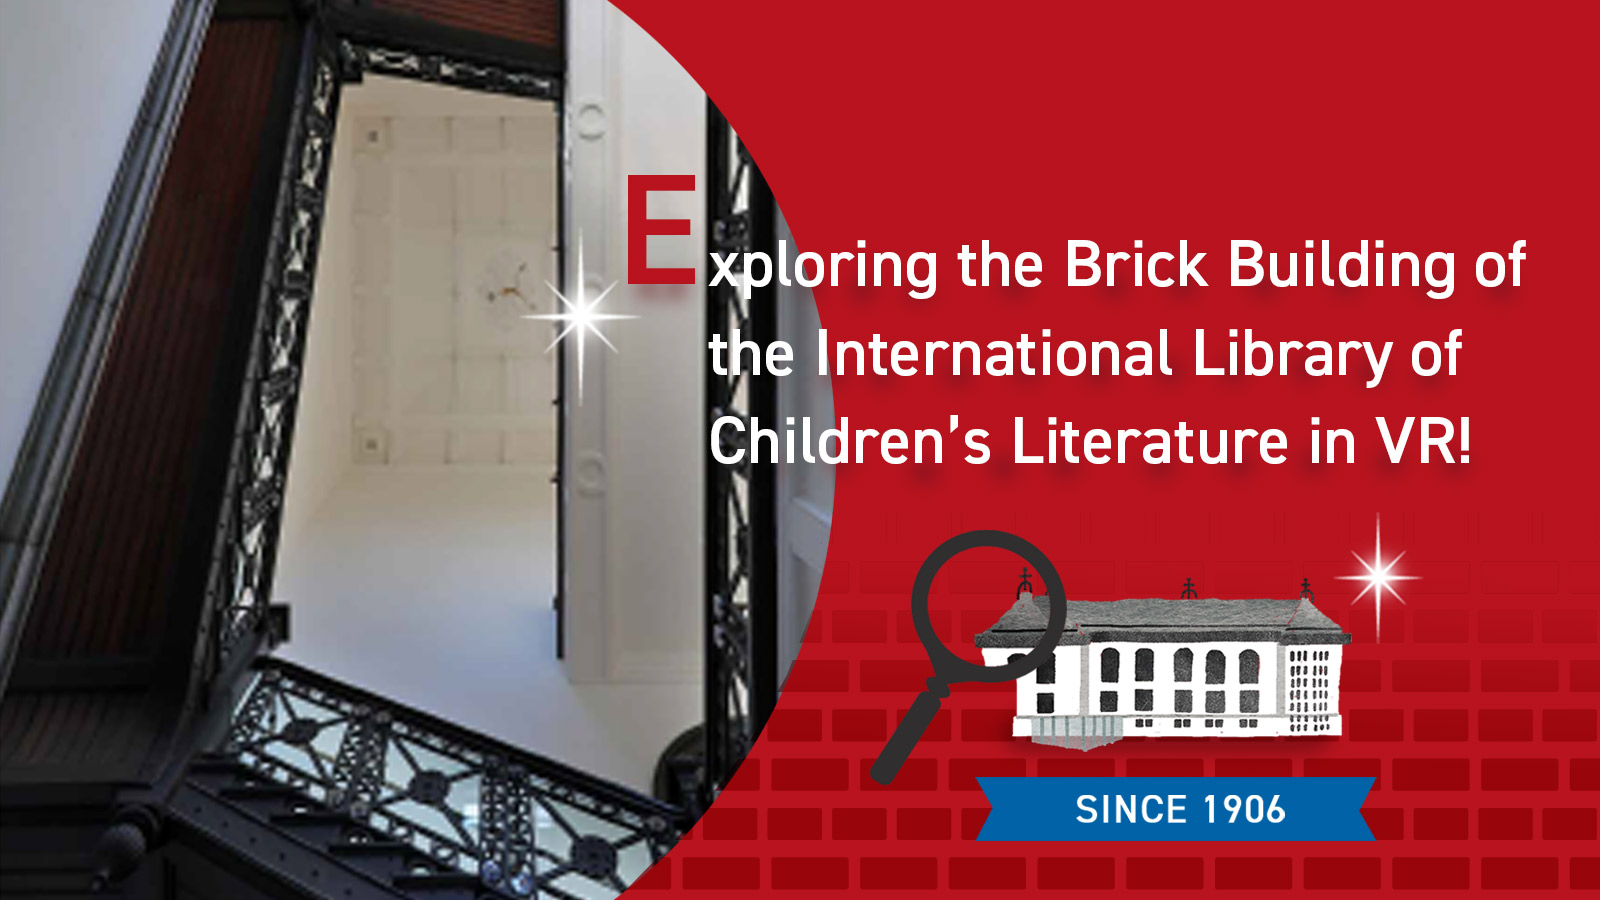 Exploring the Brick Building of the ILCL in VR!